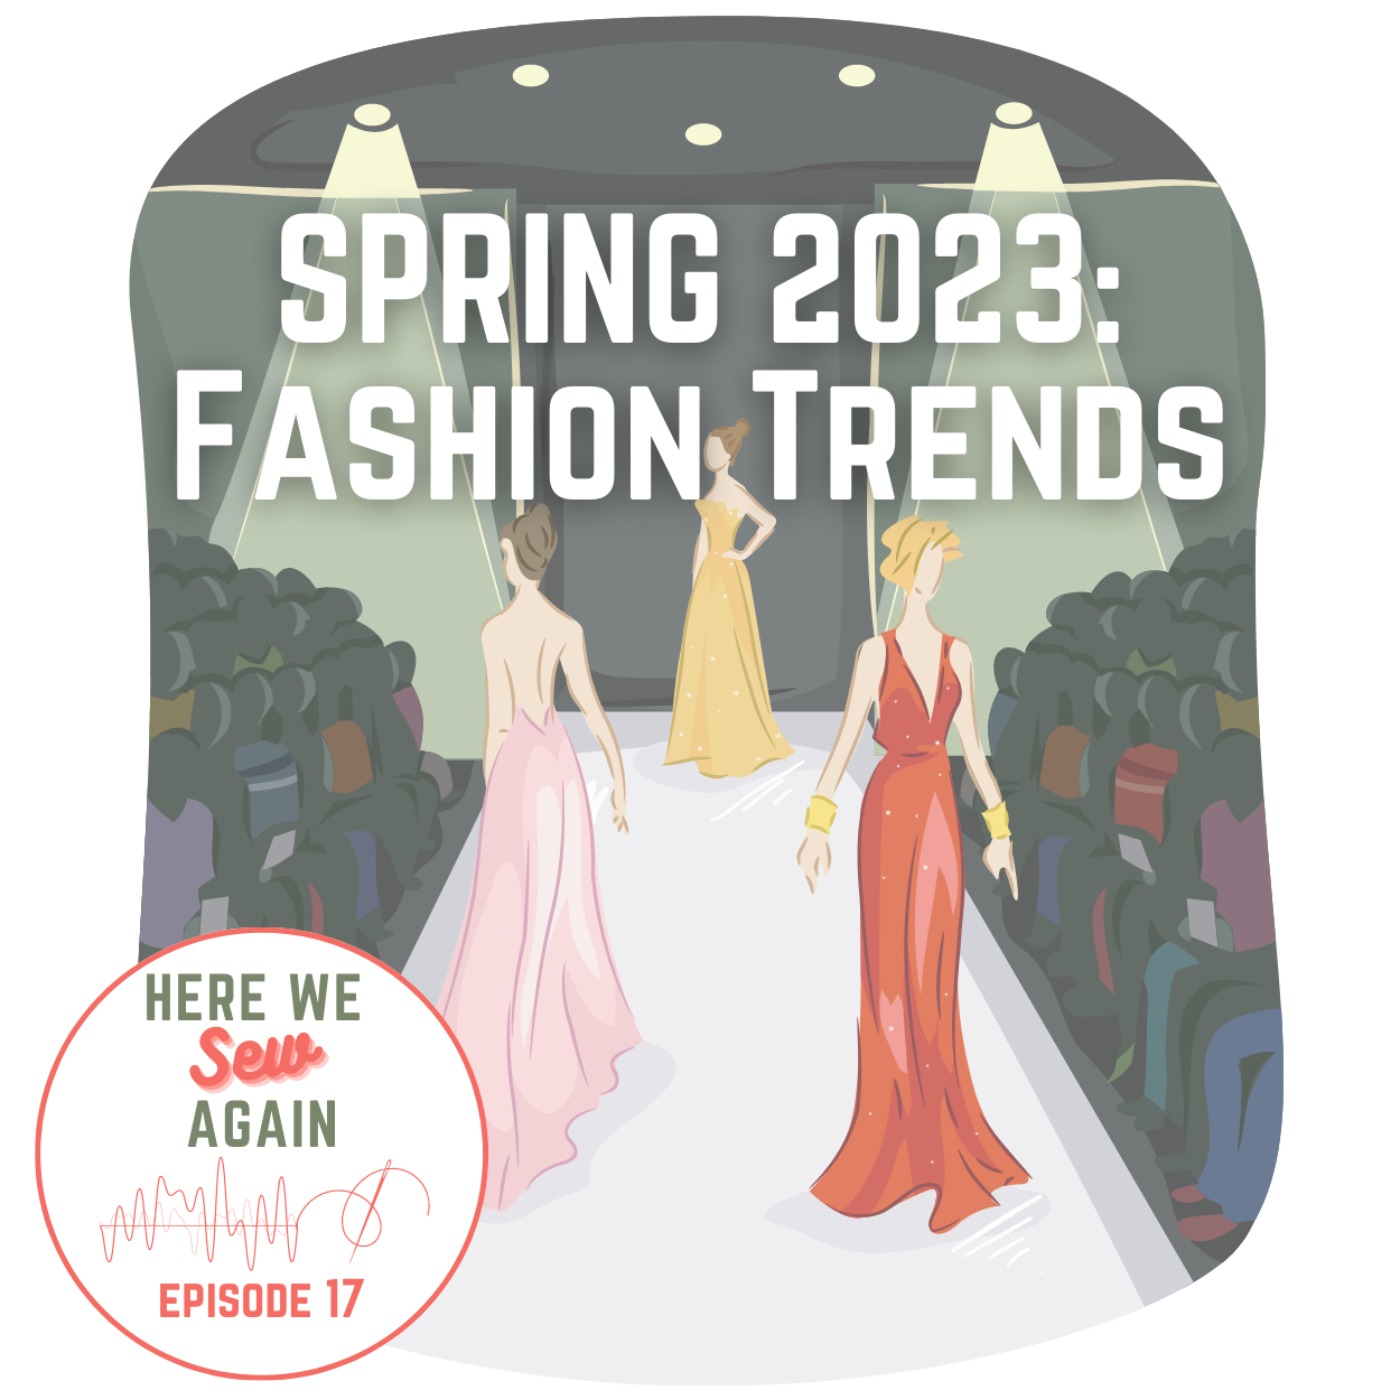 Spring 2023: Fashion Trends